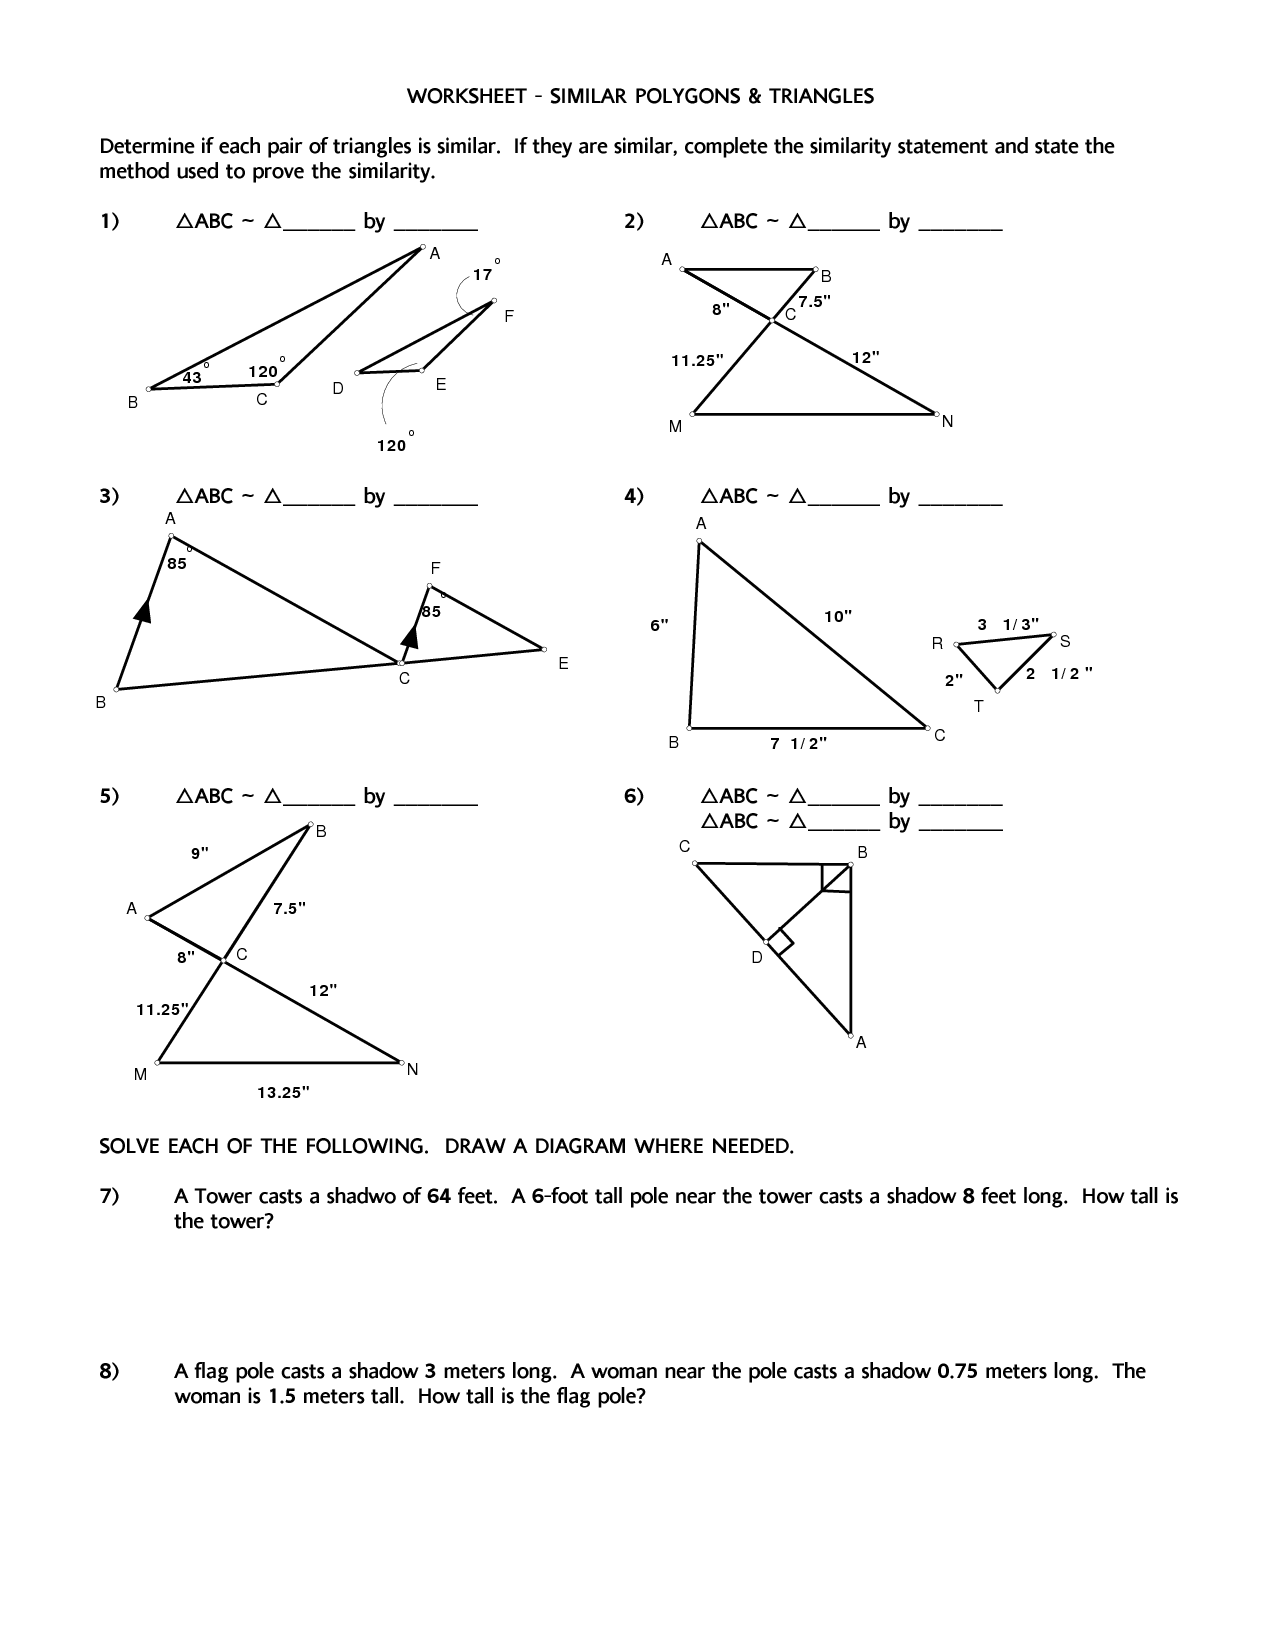 Similar Triangles and Polygons Worksheet Image